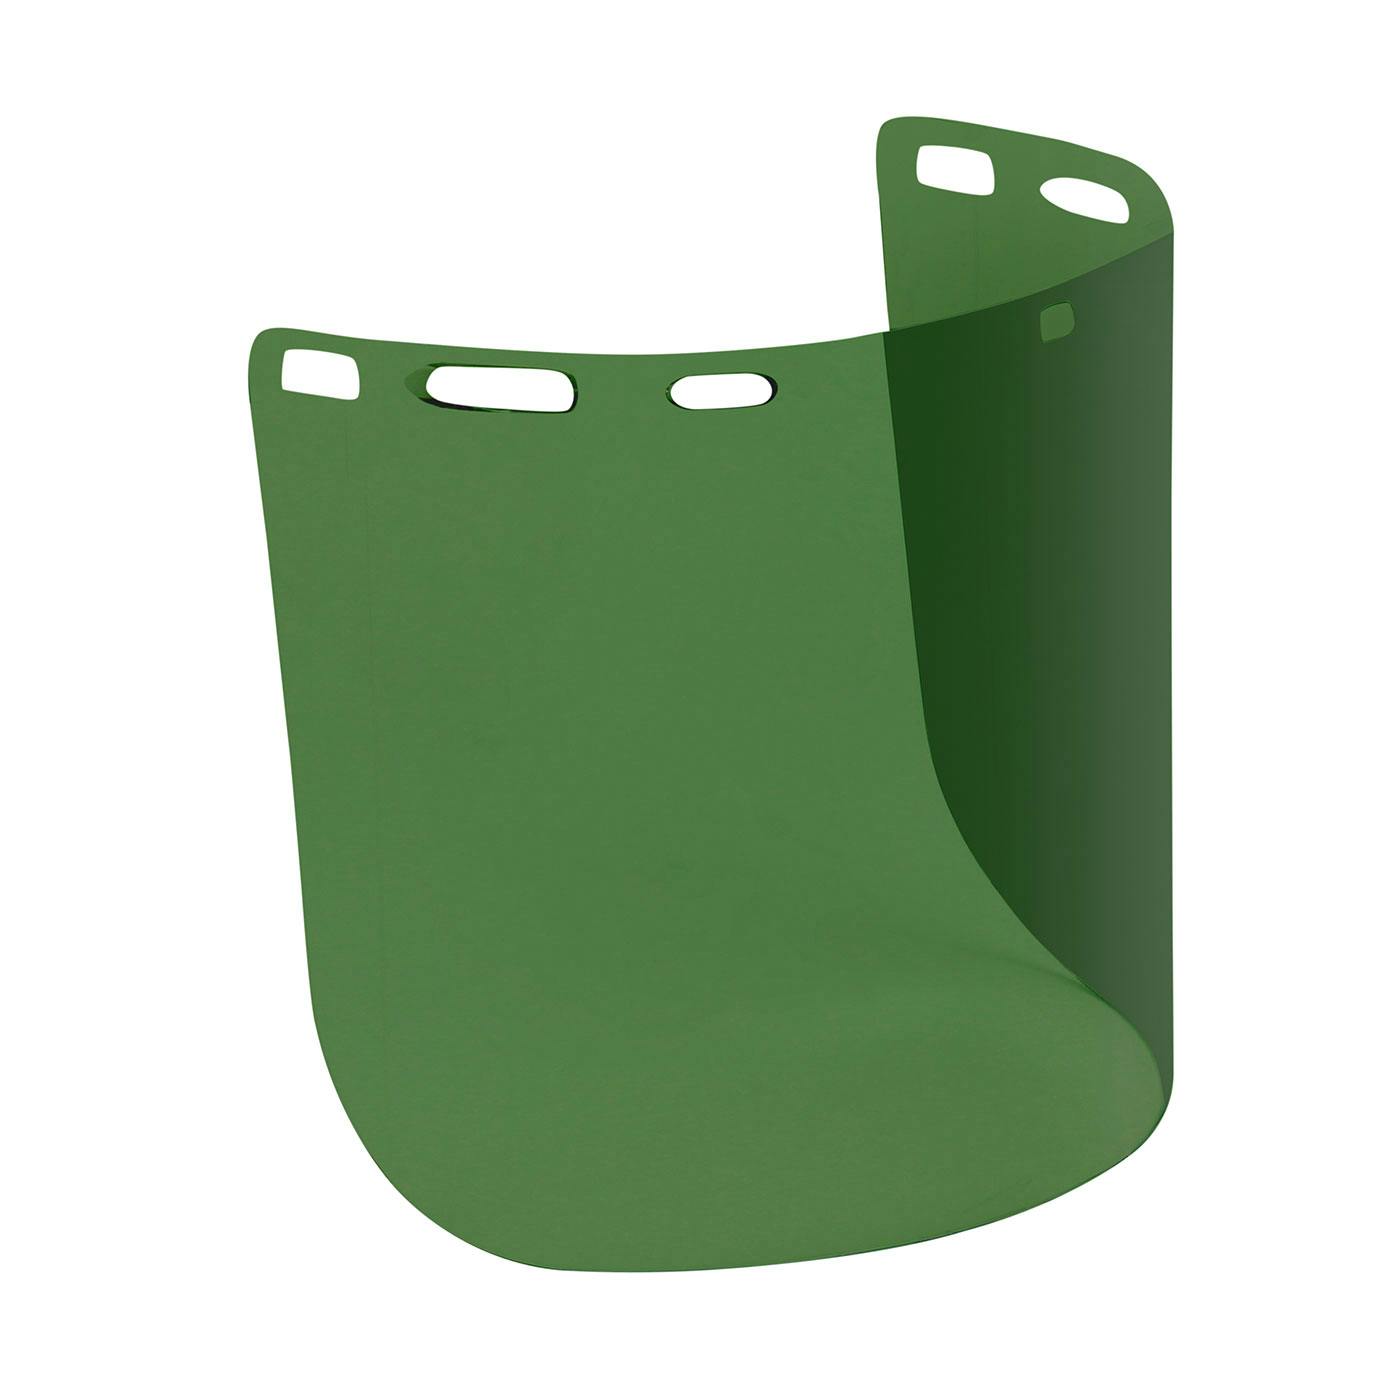 Uncoated Polycarbonate Safety Visor - Medium Green Tint, Green (251-01-7311) - OS_1